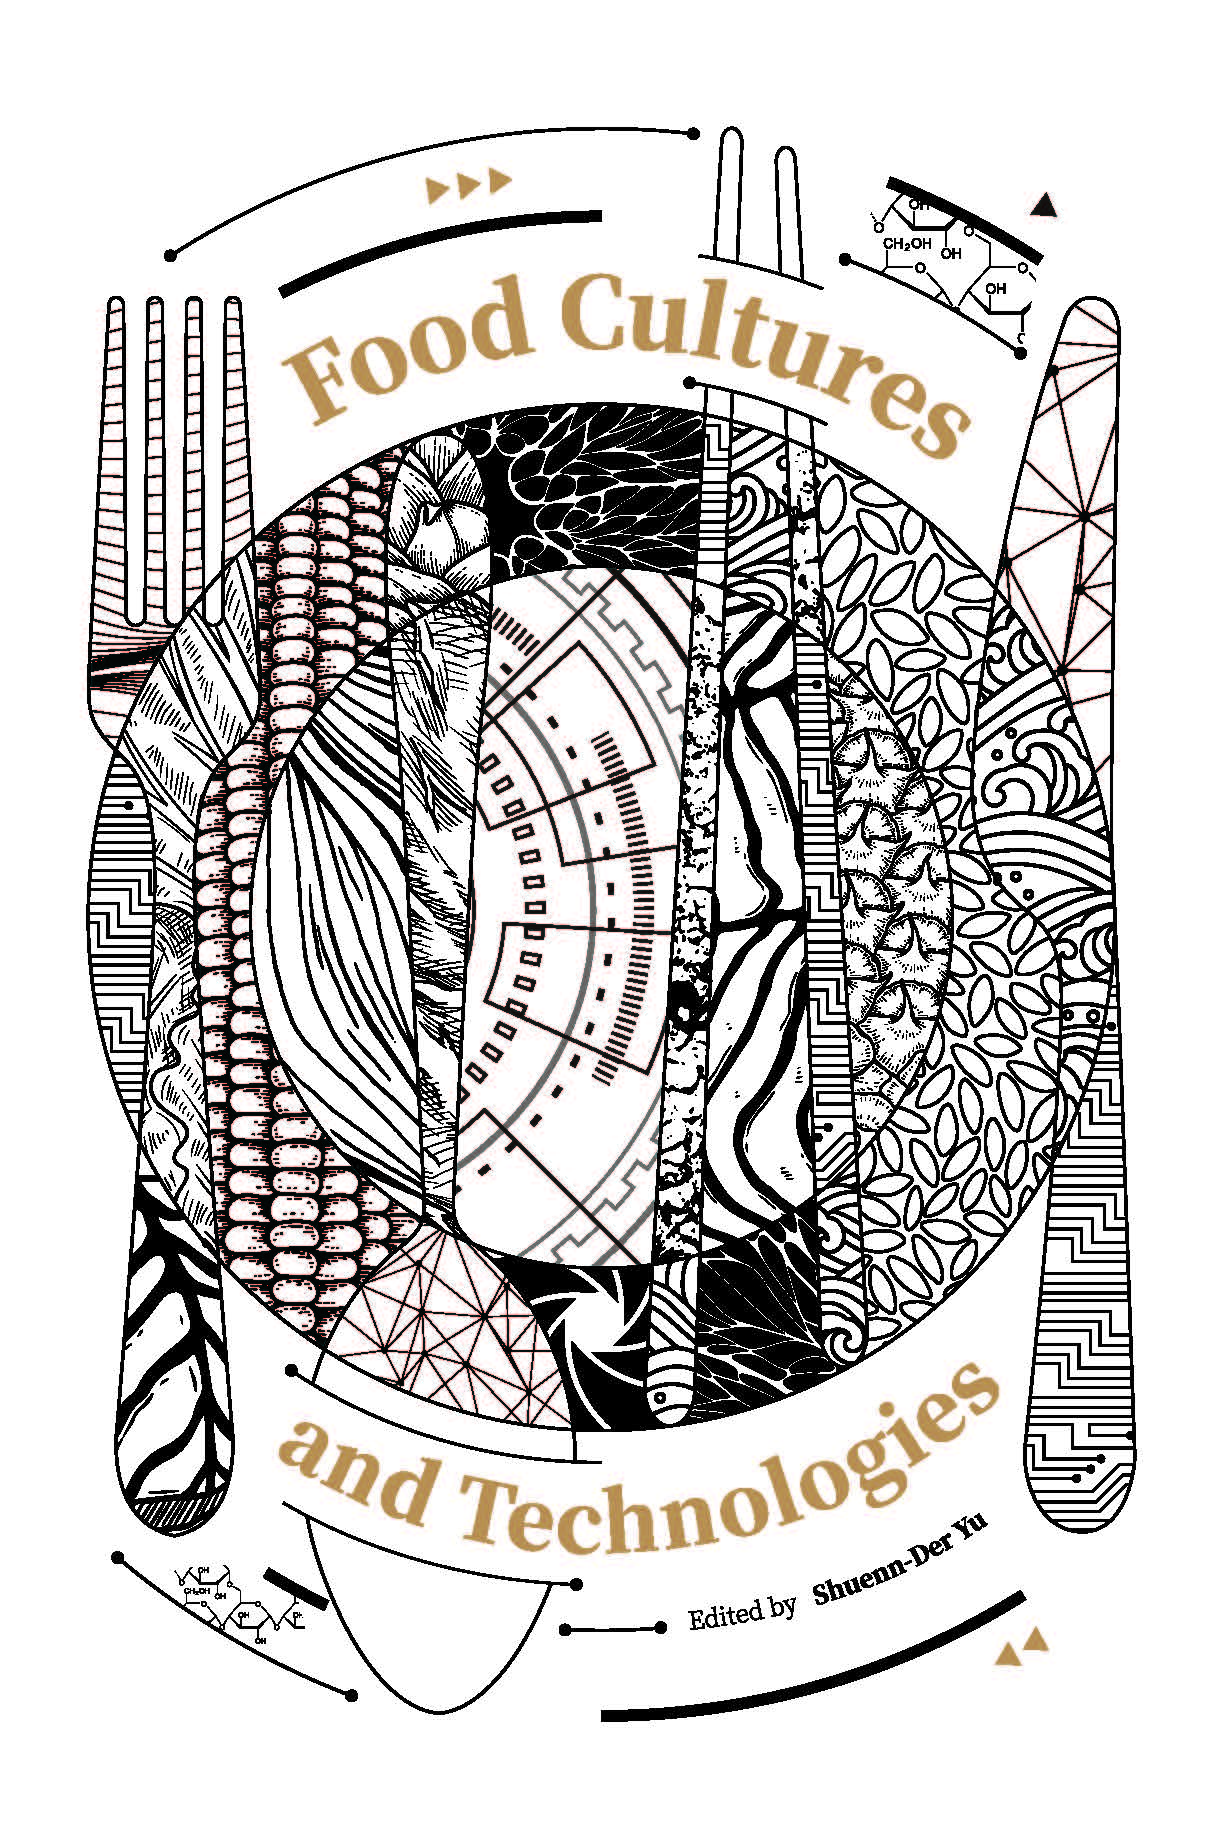 Food cultures and technologies